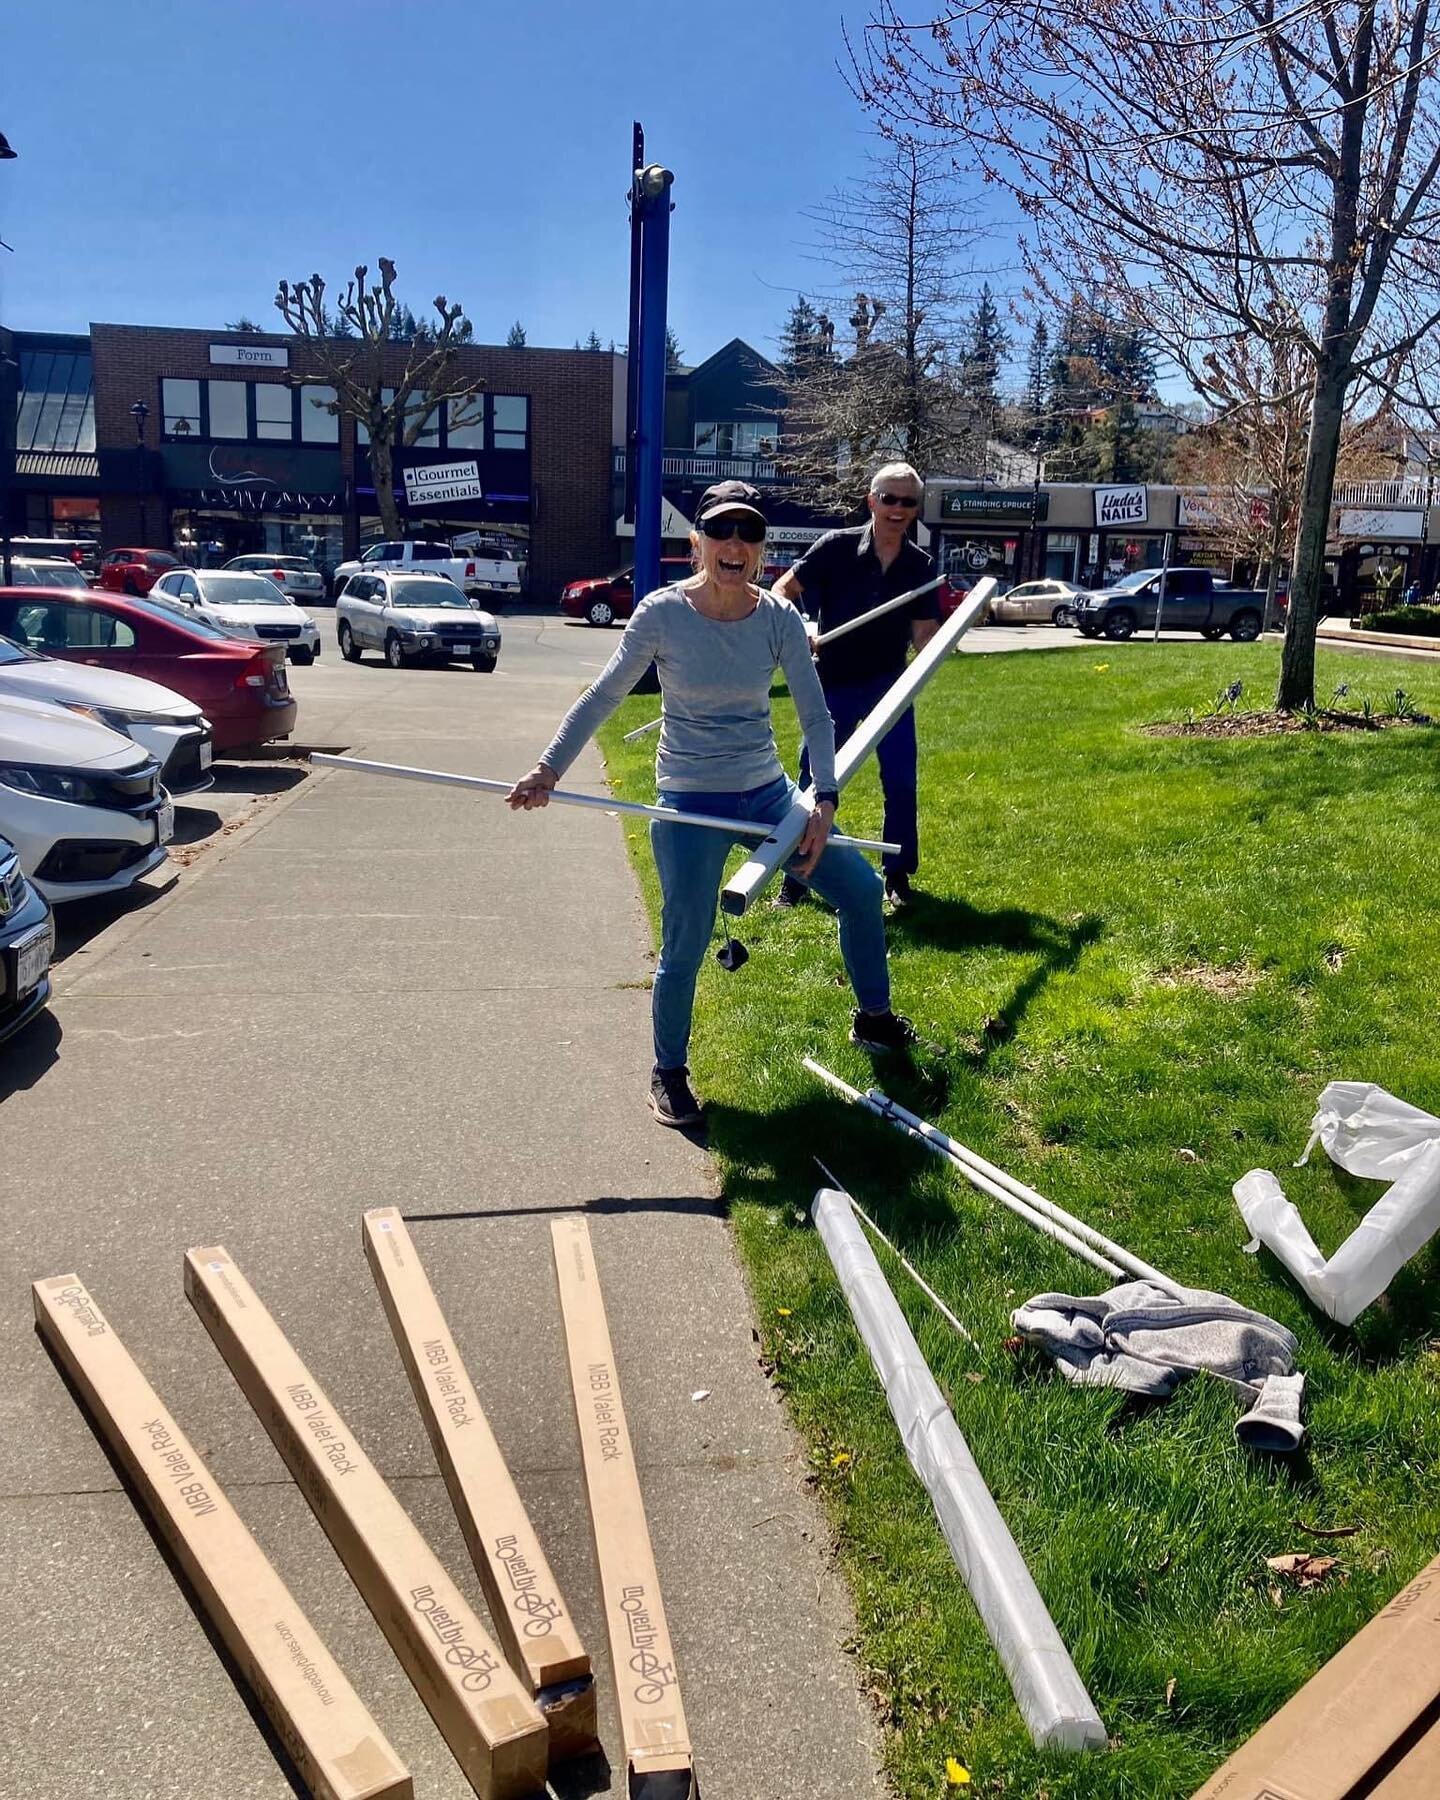 The bike racks have arrived - now for the volunteers!

One of the obstacles to riding a bicycle downtown is the lack of safe and secure bike parking. The Cycling Advocacy Committee would like to change that.

To that end we&rsquo;ve acquired some por